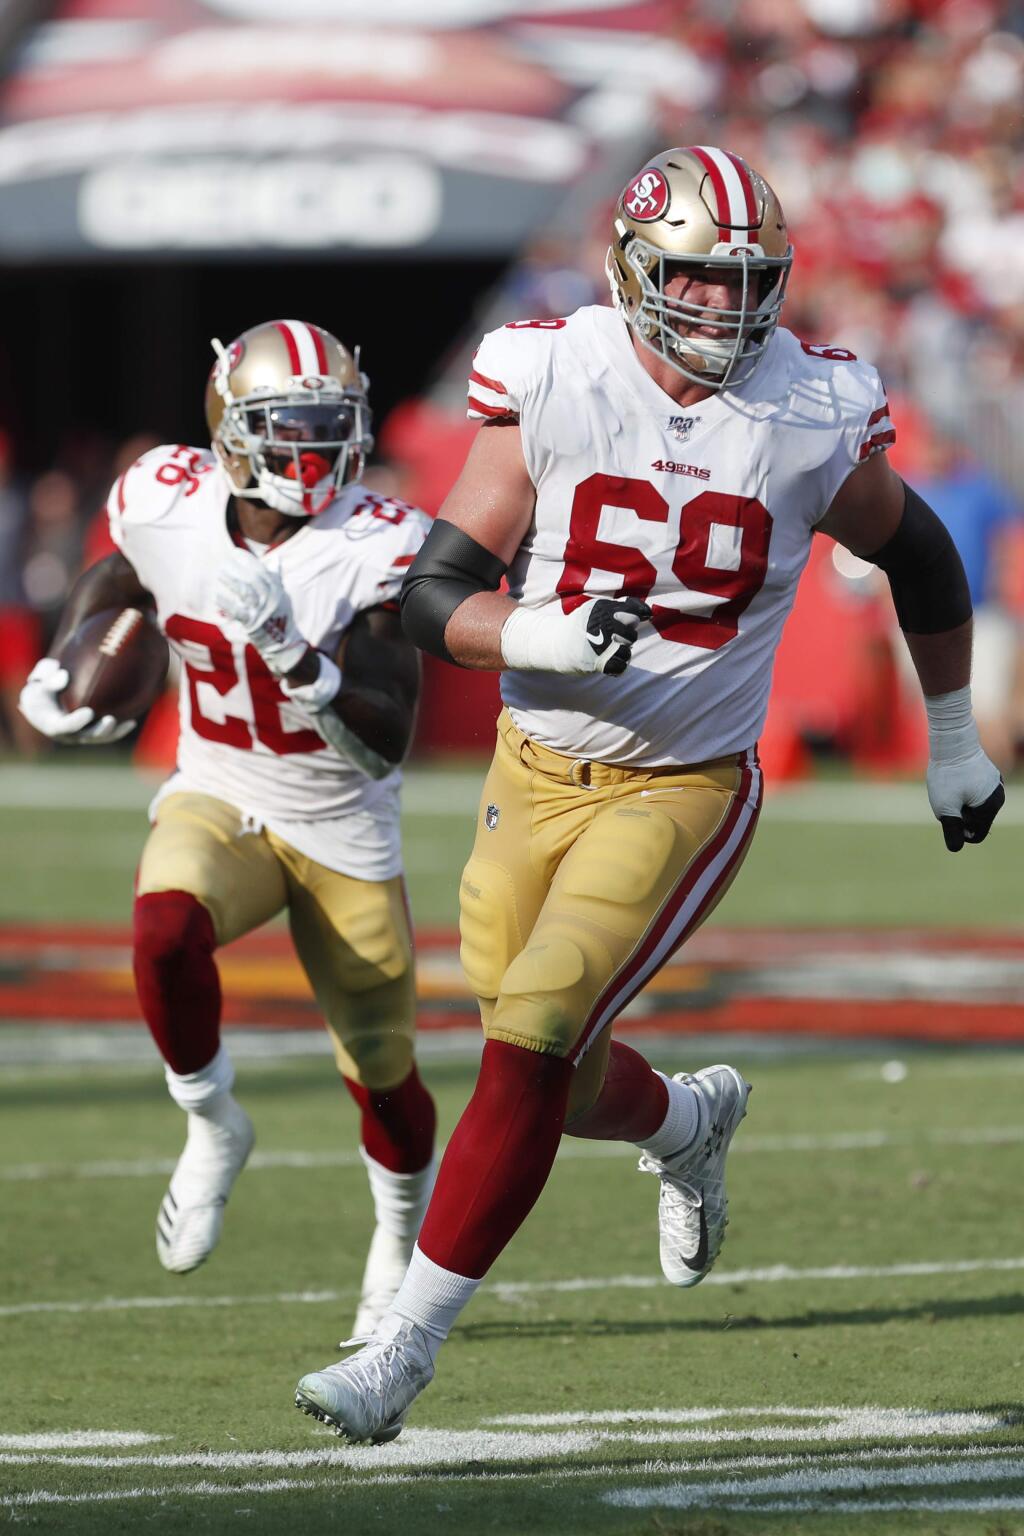 San Francisco 49ers offensive tackle Mike McGlinchey, right, looks to block for running back Tevin Coleman against the Tampa Bay Buccaneers during the first half, Sunday, Sept. 8, 2019, in Tampa, Fla. (AP Photo/Mark LoMoglio)